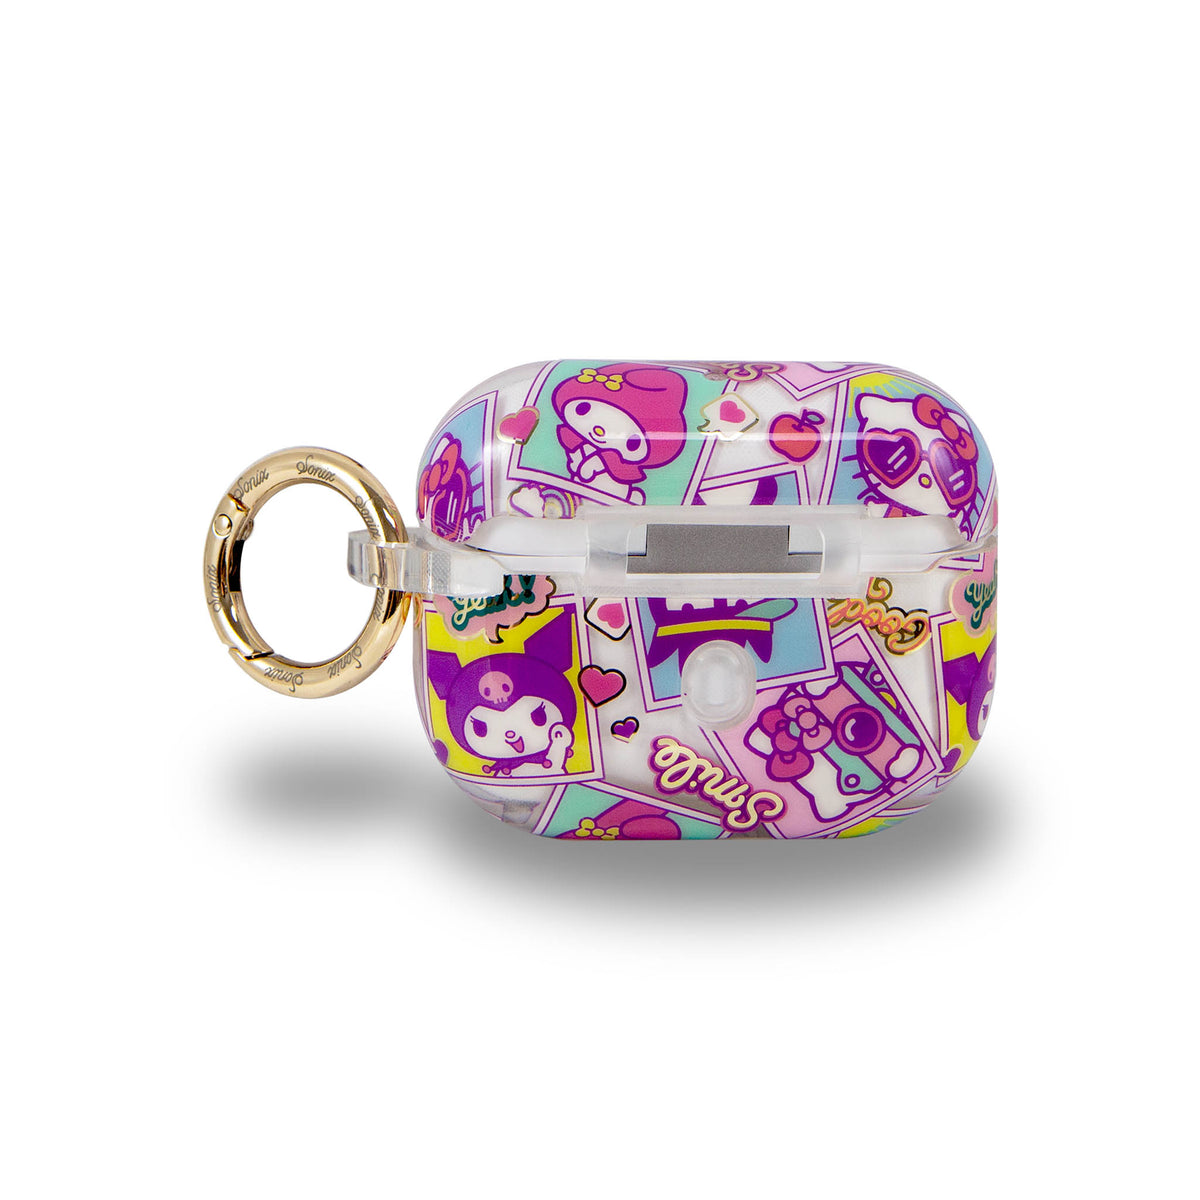 Hello Kitty and Friends x Sonix Snapshots AirPods Case Accessory BySonix Inc.   